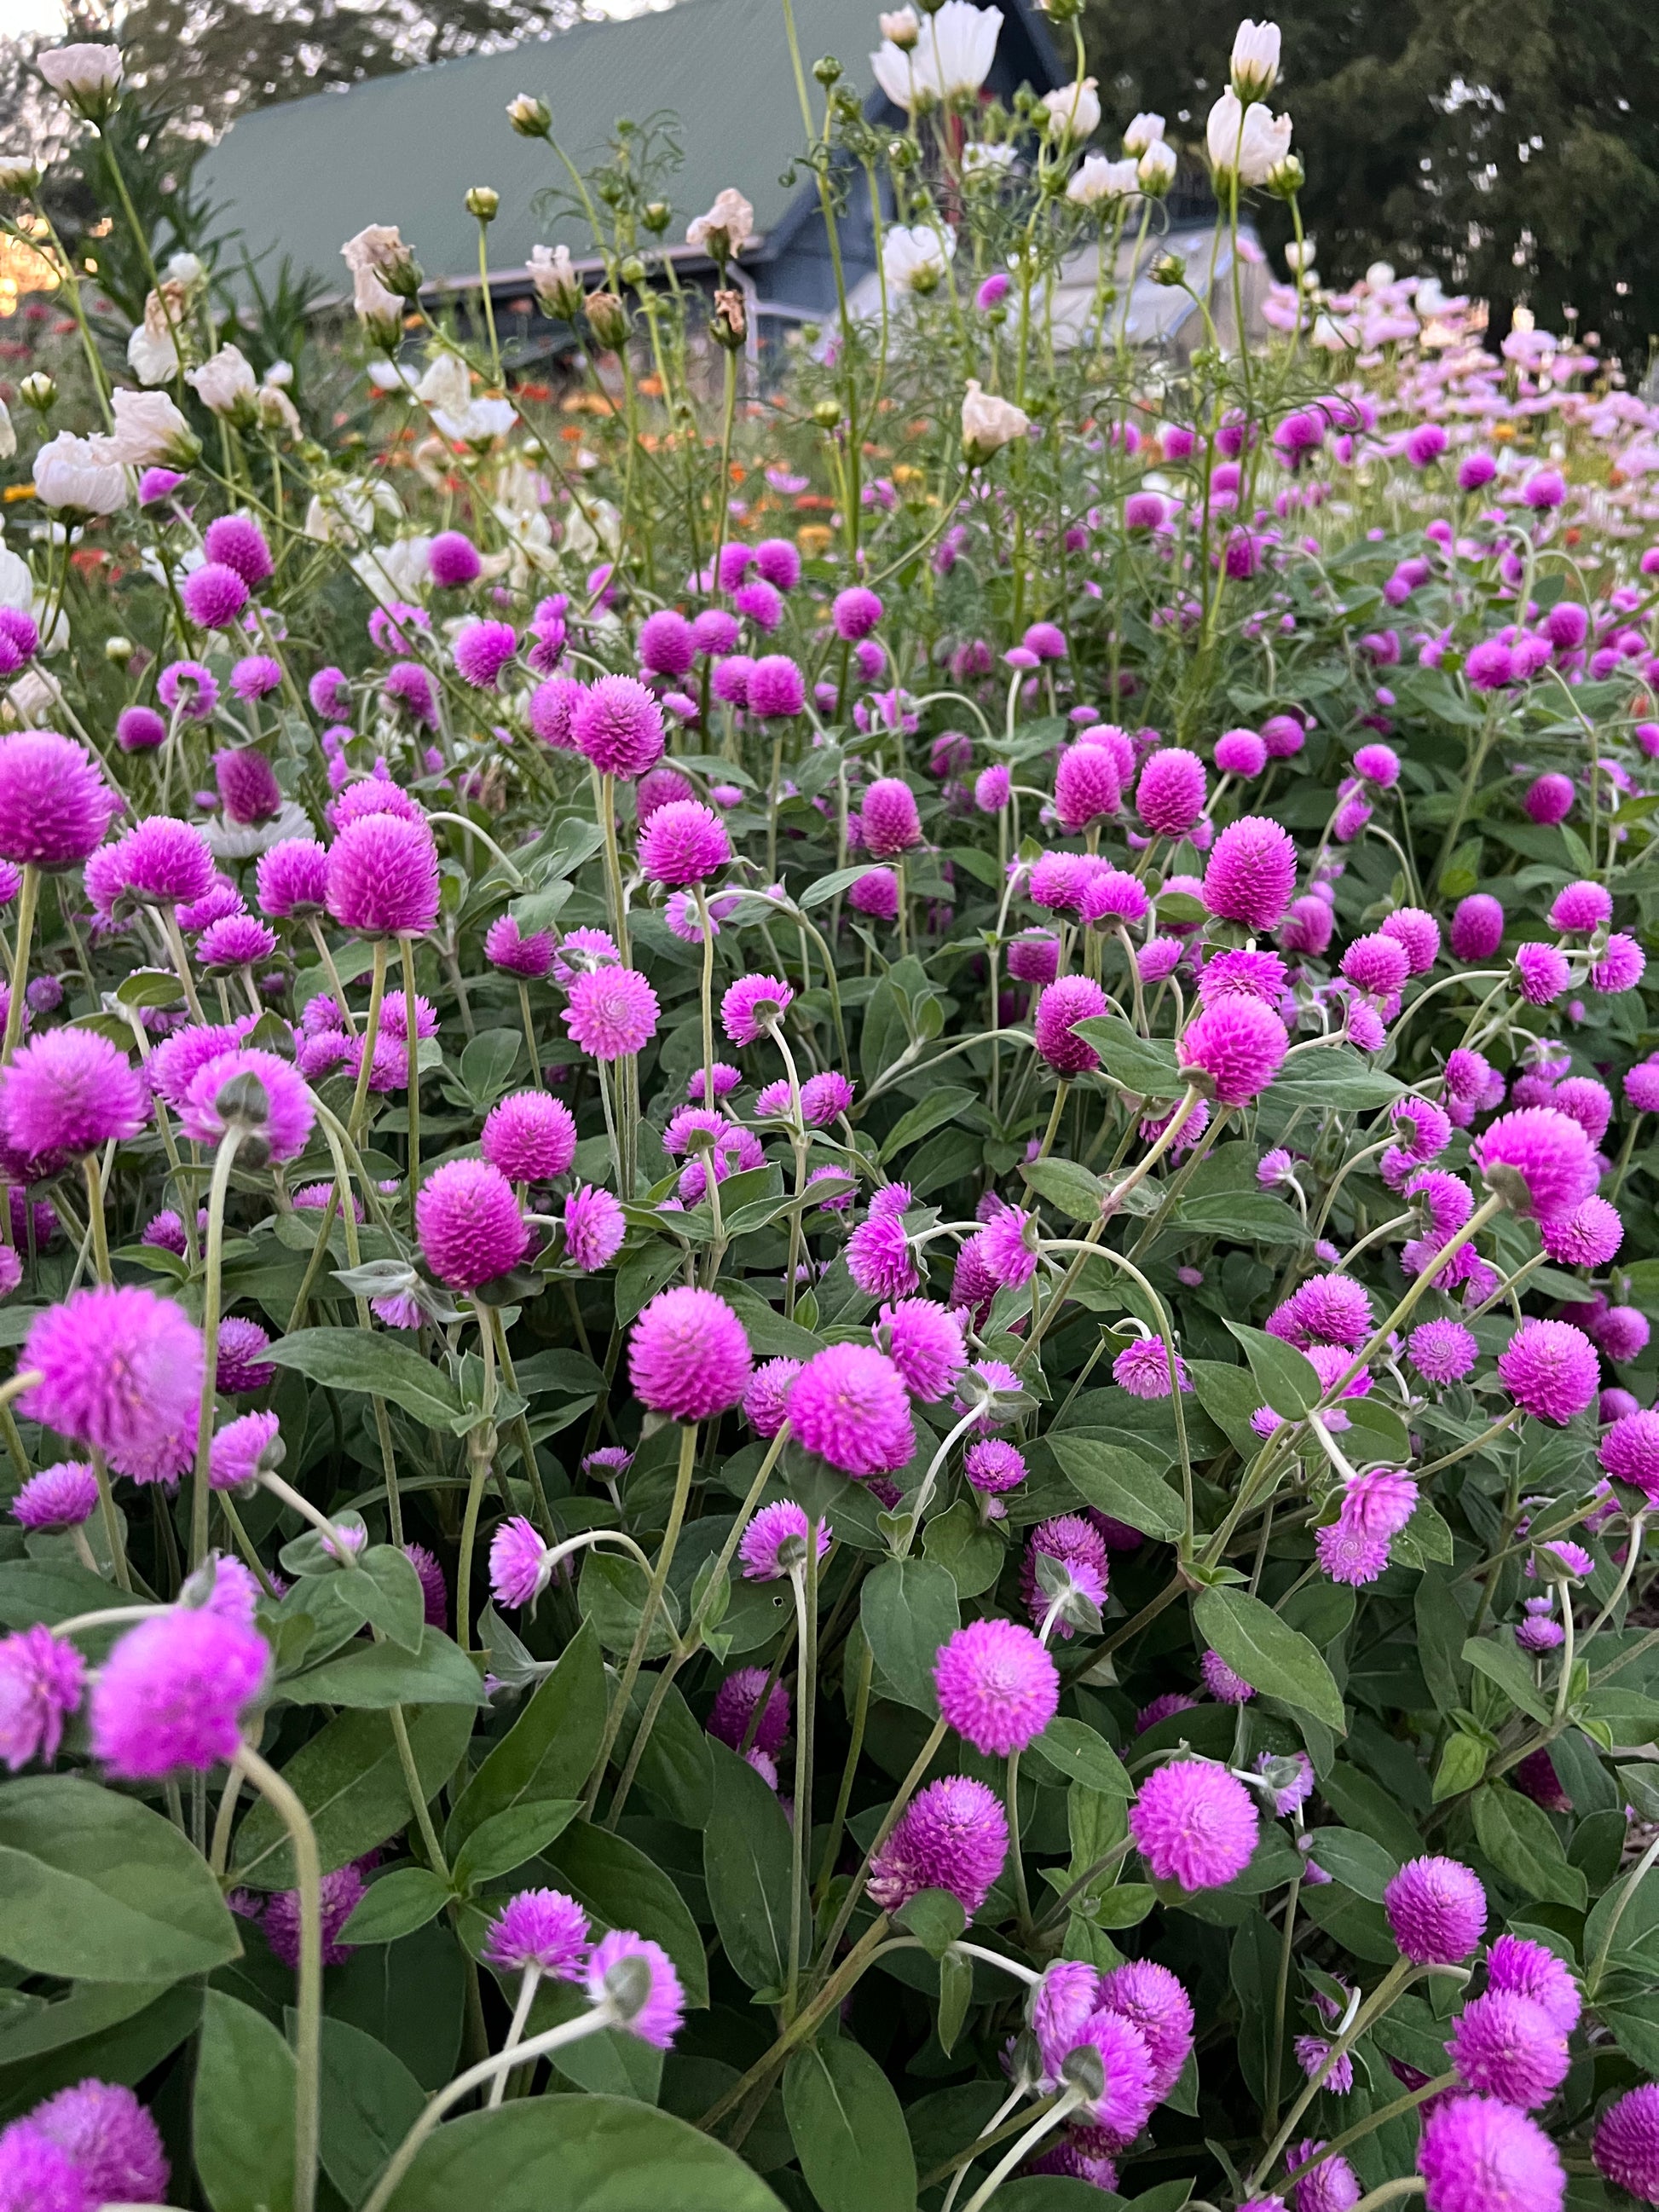 White Gomphrena Seeds, Easy to Grow Globe Amaranth for Cut Flowers